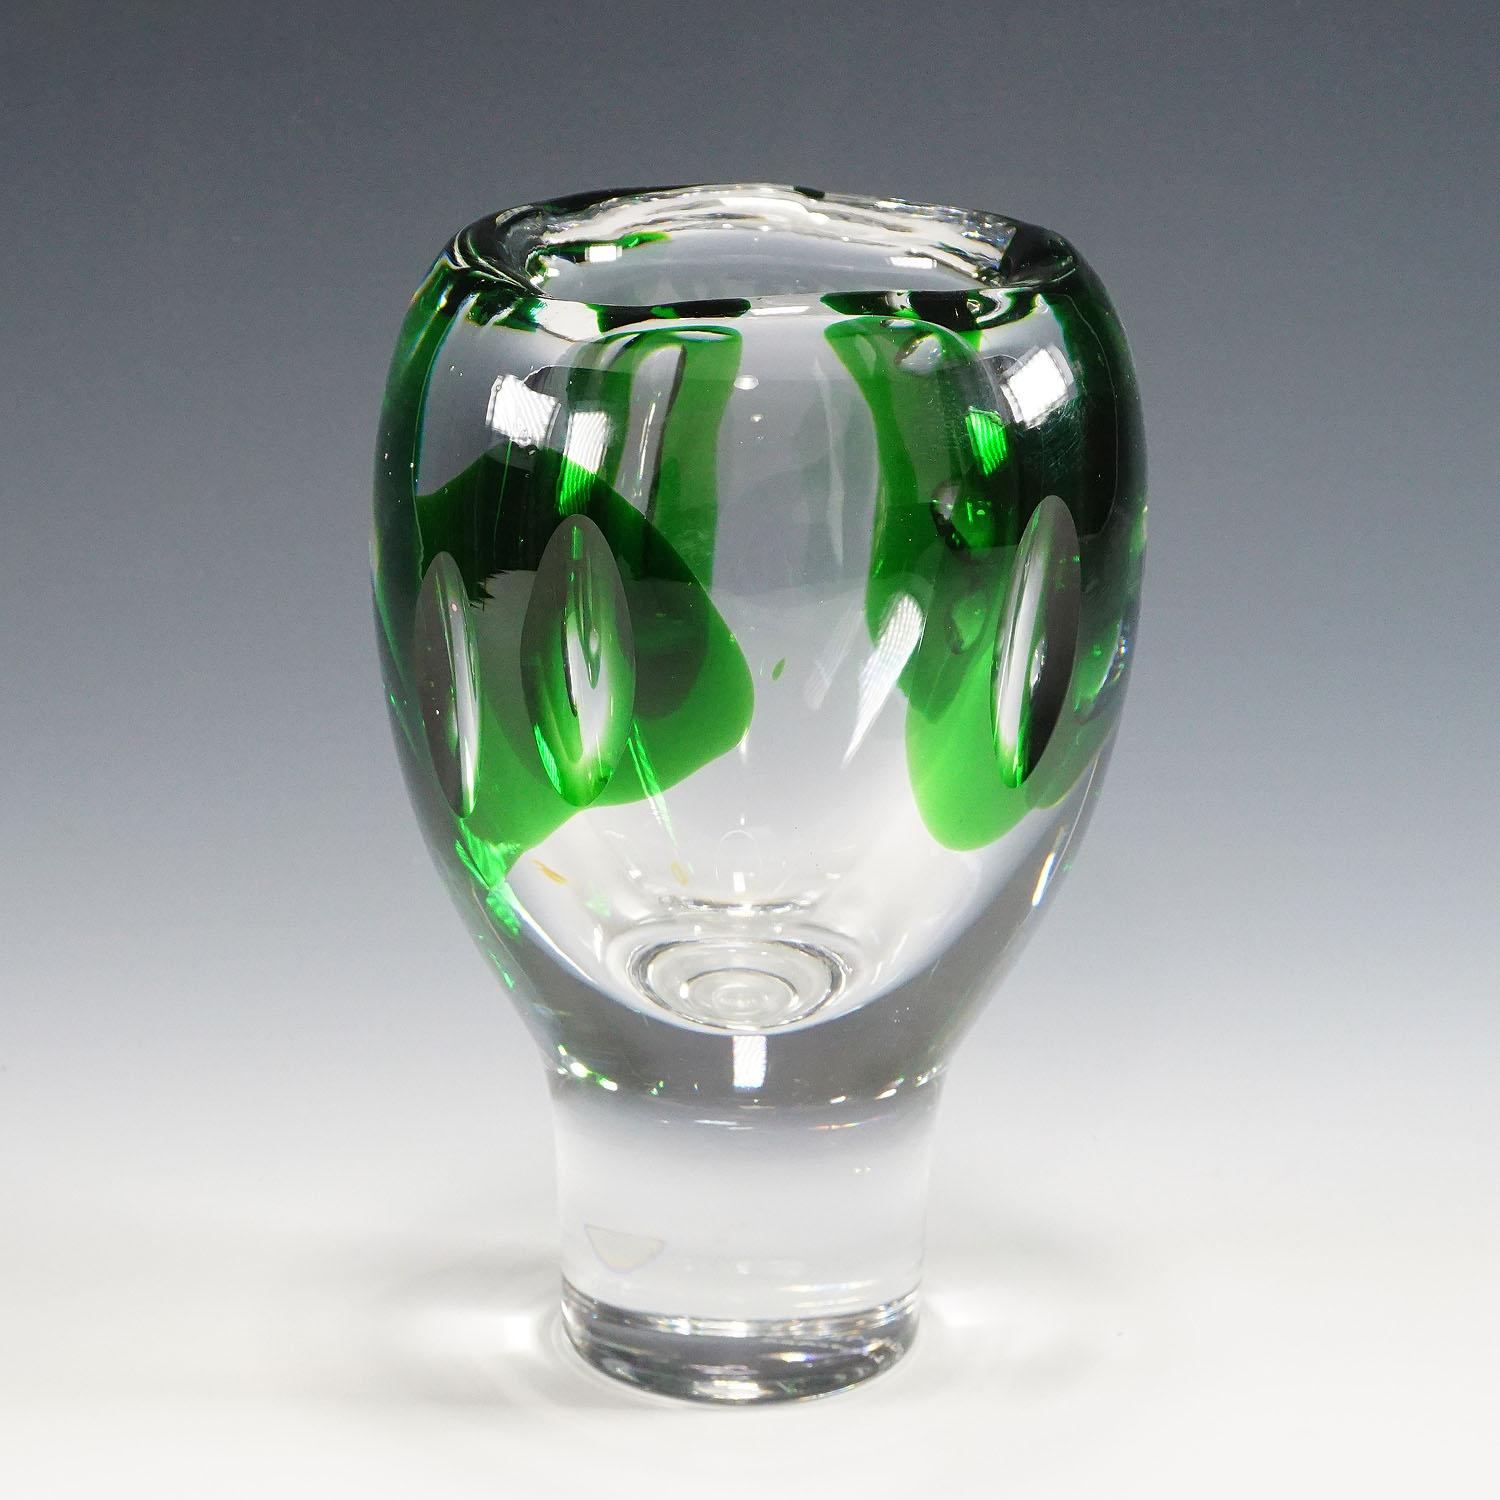 A heavy art glass vase designed by Vicke Lindstrand for Kosta Sweden ca. 1960ties. The thick clear glass has green glass applications and polished olive cuttings on the body. It is marked with manufacturer lable and incised signature (kosta 46690